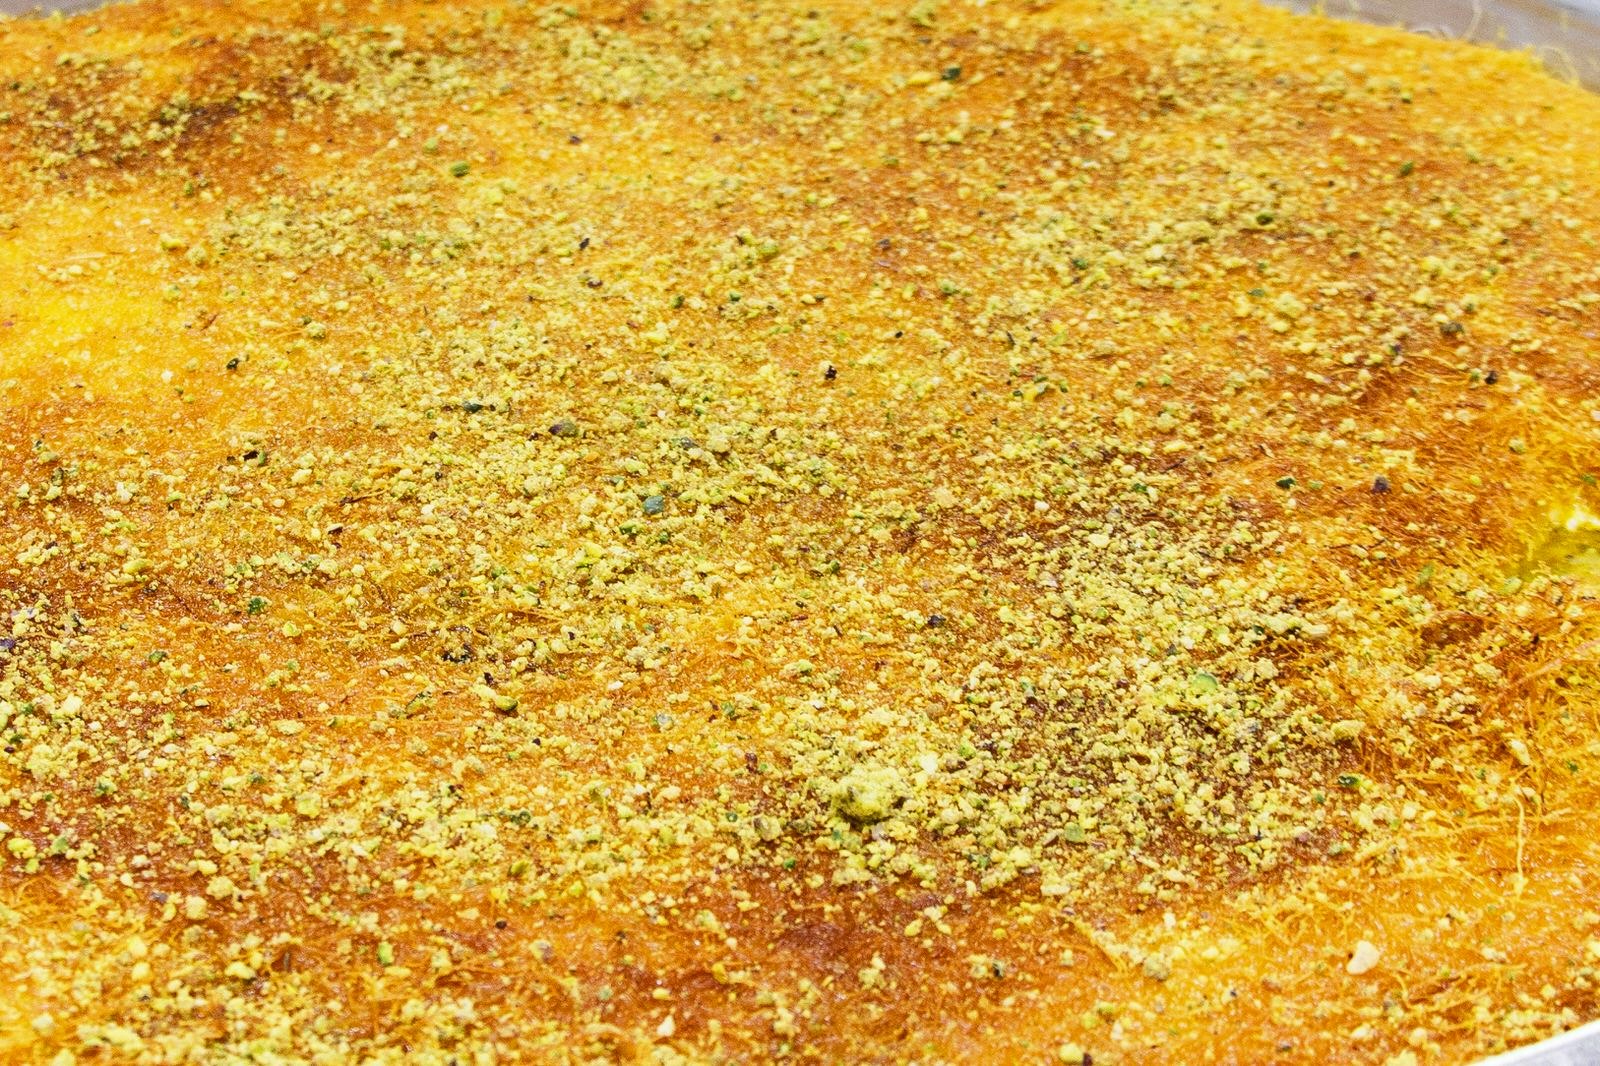 The hard-crust kunafeh at Al Aker is worth a trip out into Amman's suburbs. Image by Bassel Masannat / Lonely Planet